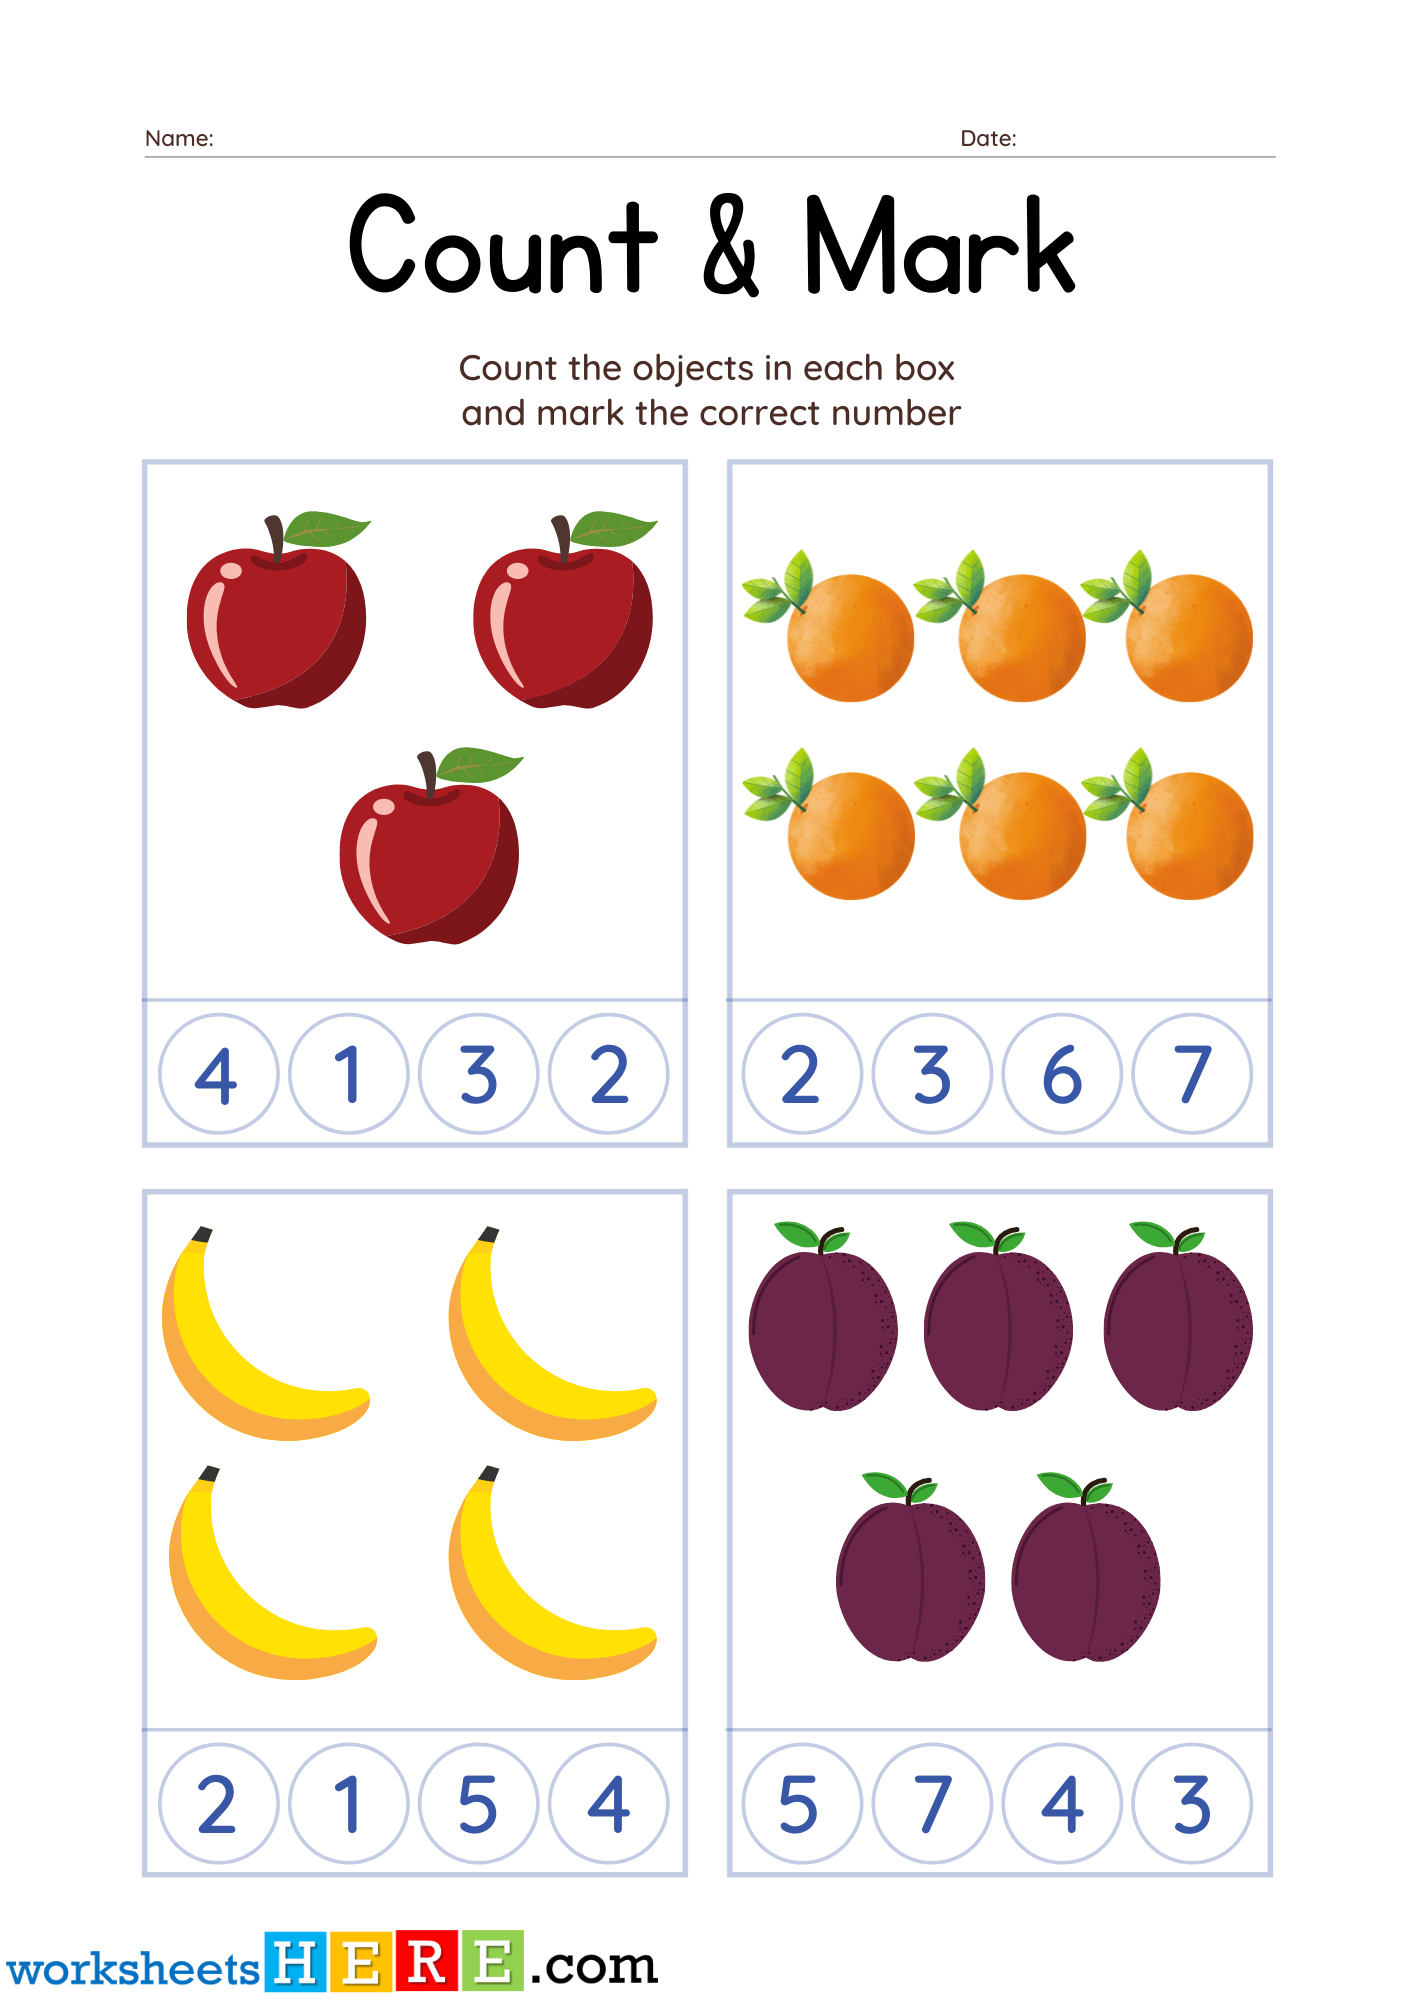 Count the Fruits and Mark the Correct Number PDF Worksheet For Kindergarten